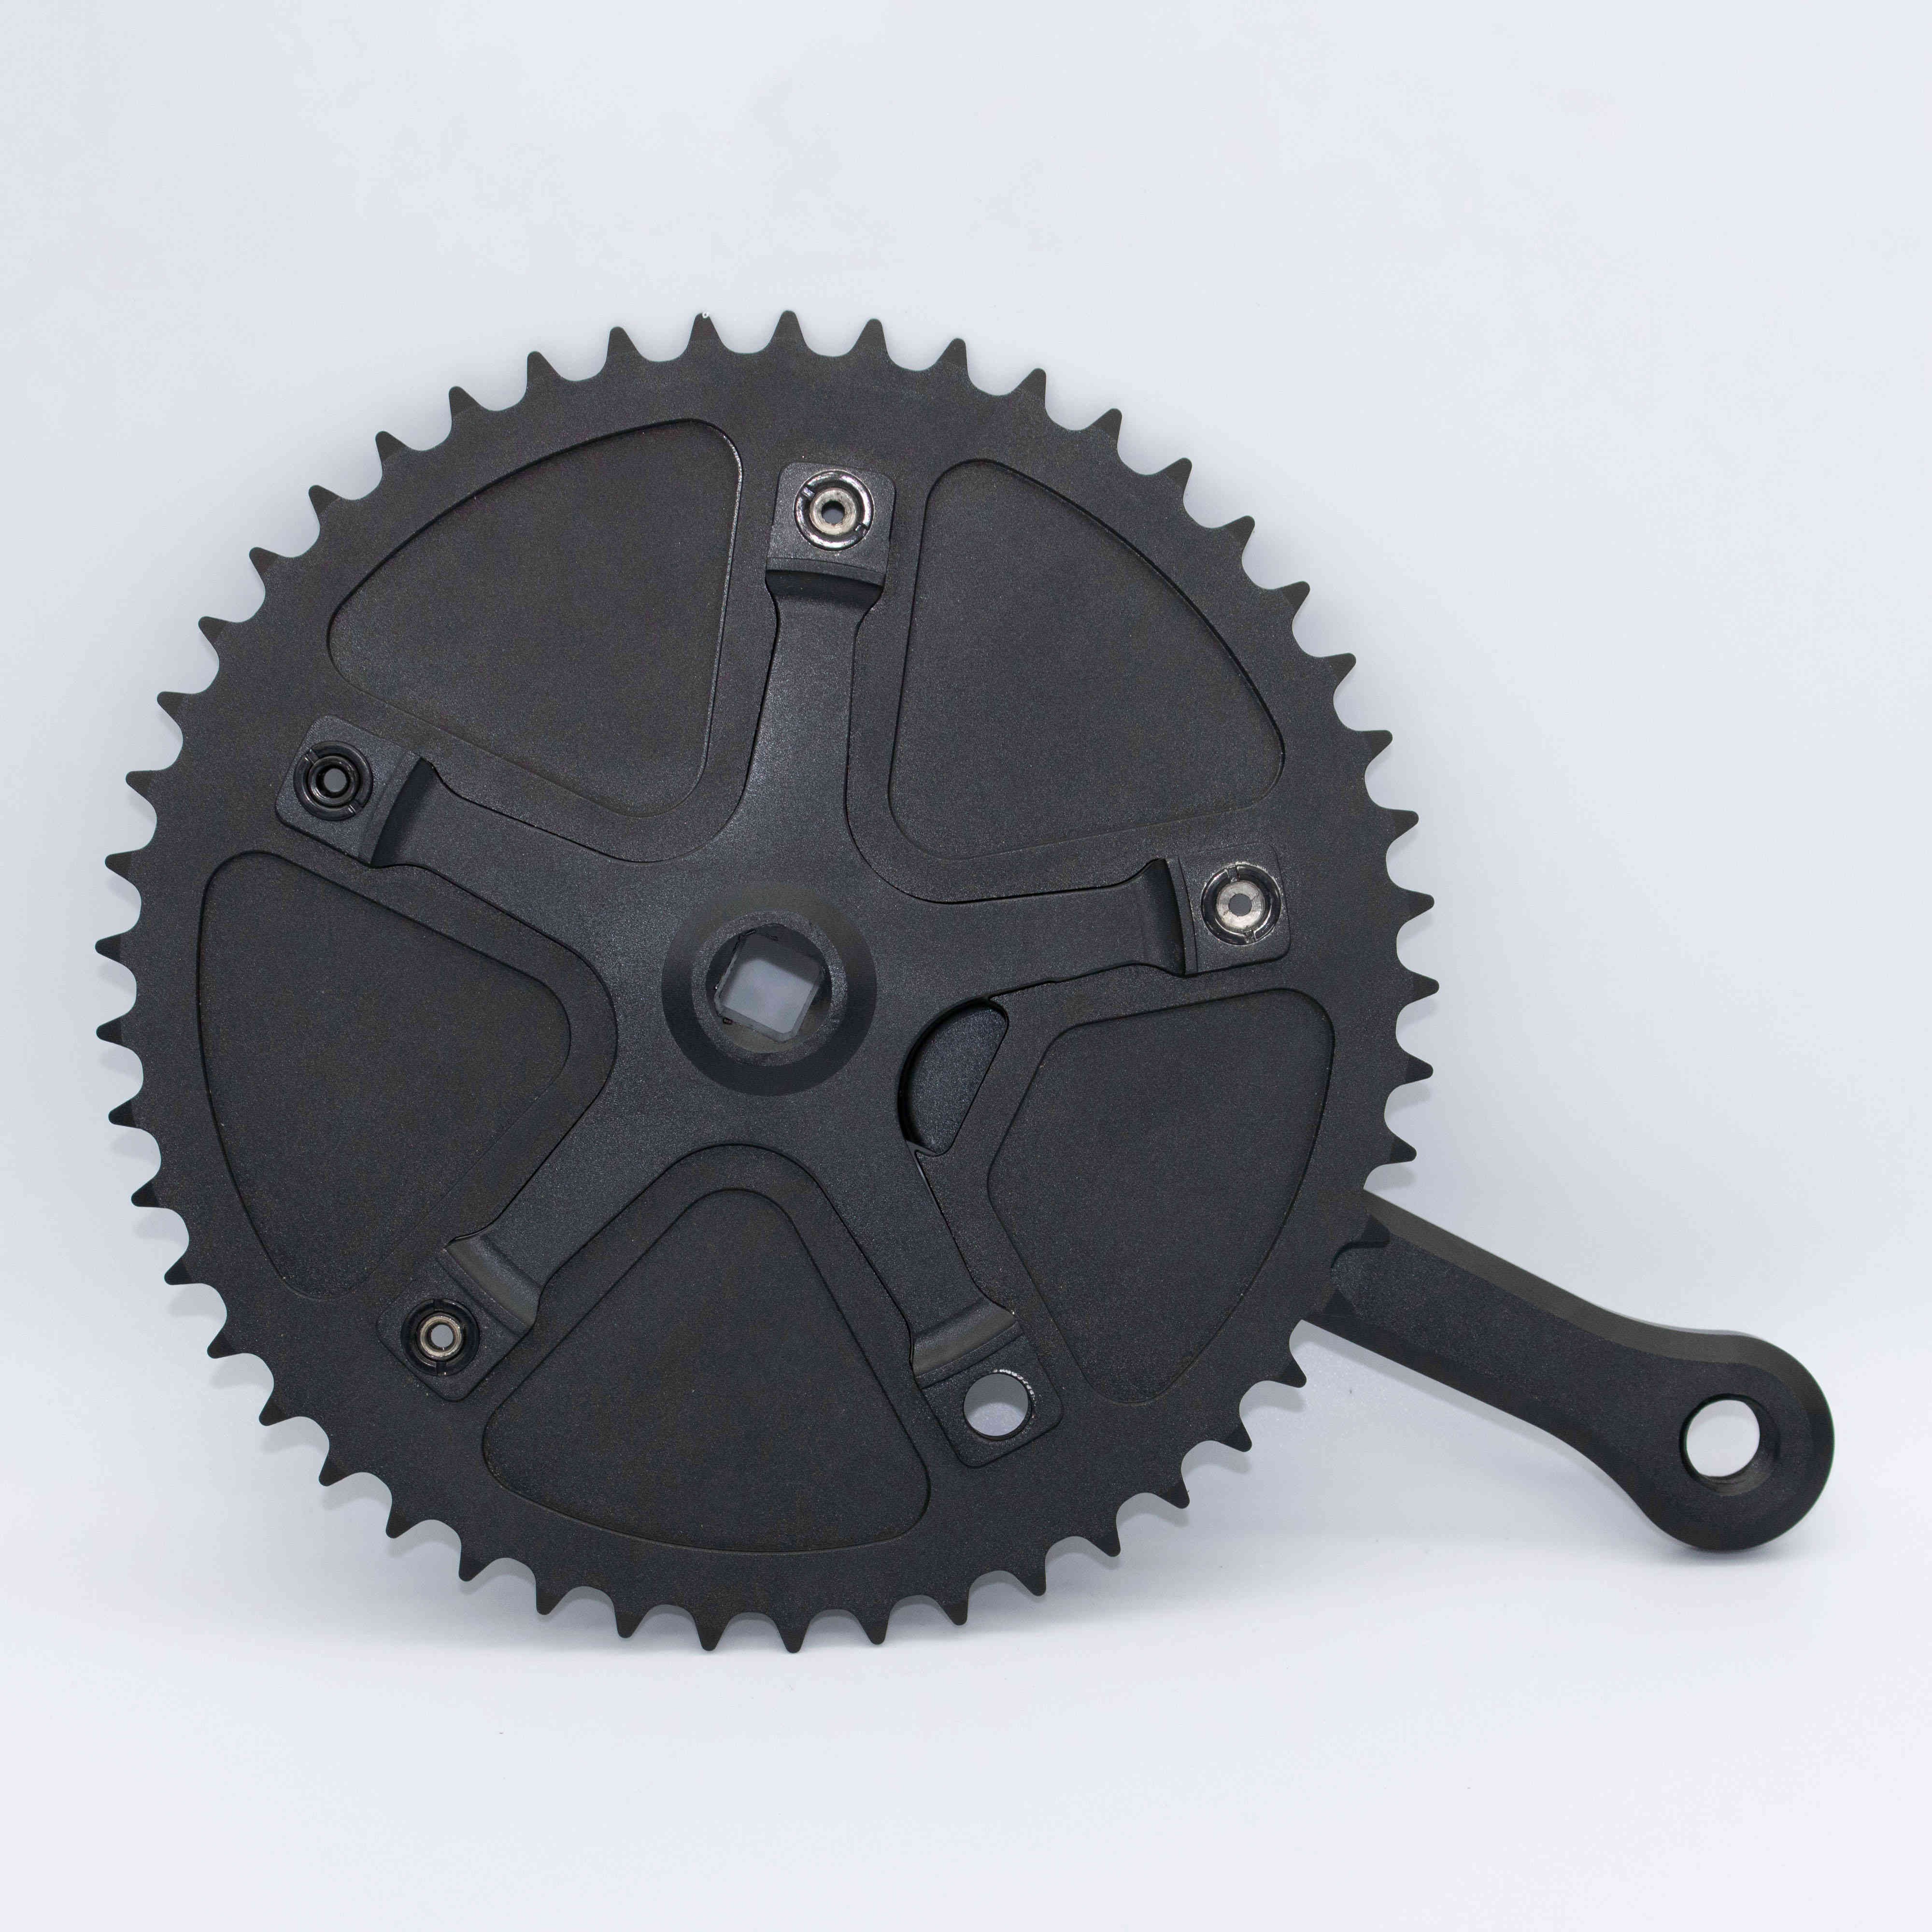 High quality Cnc Aluminum Alloy chainrings and crank 44.5 chainline bicycle crankset